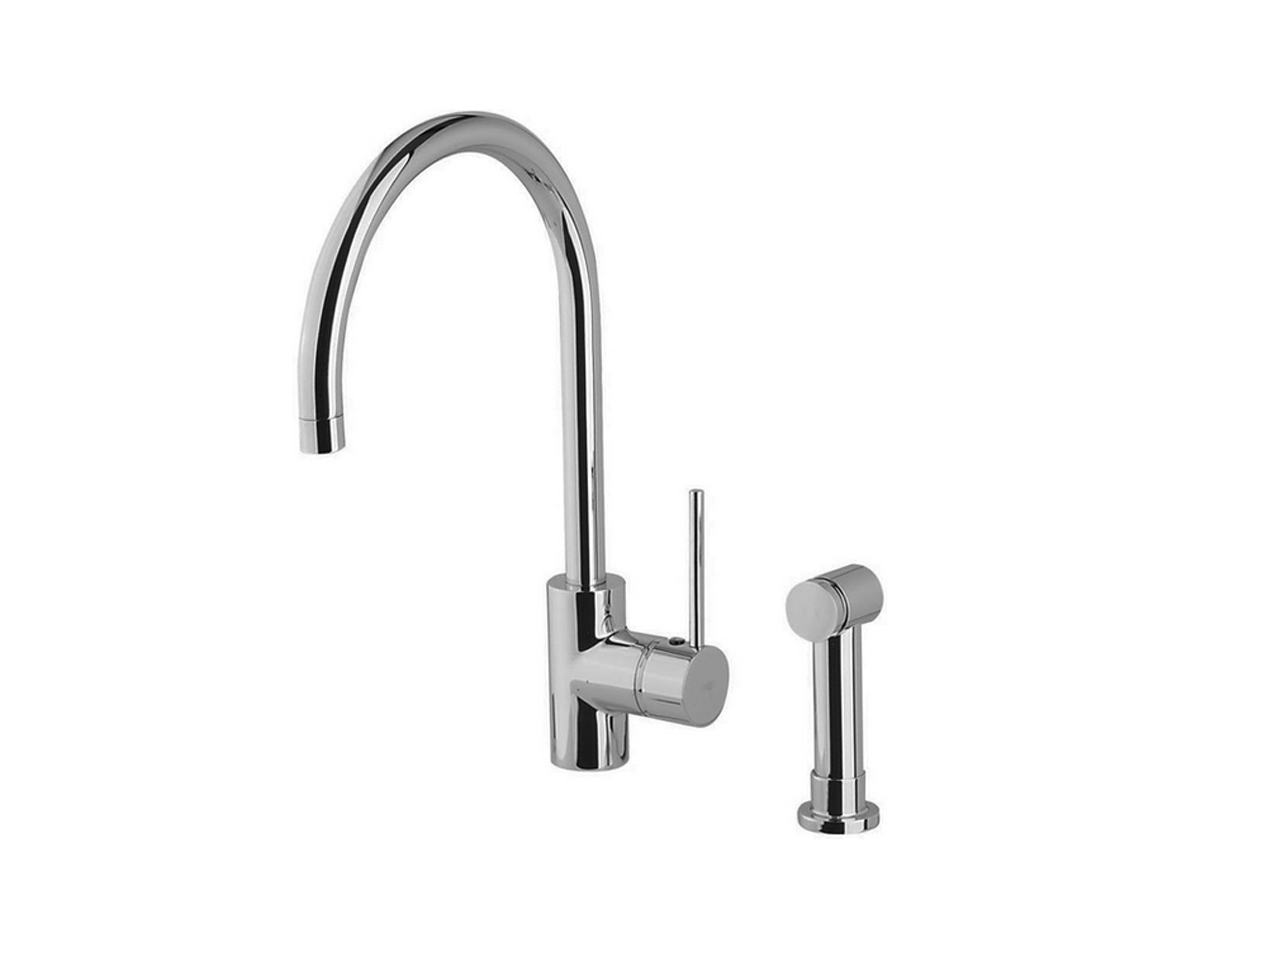 CisalSingle lever sink mixer with pull out handspray KITCHEN_LL004570